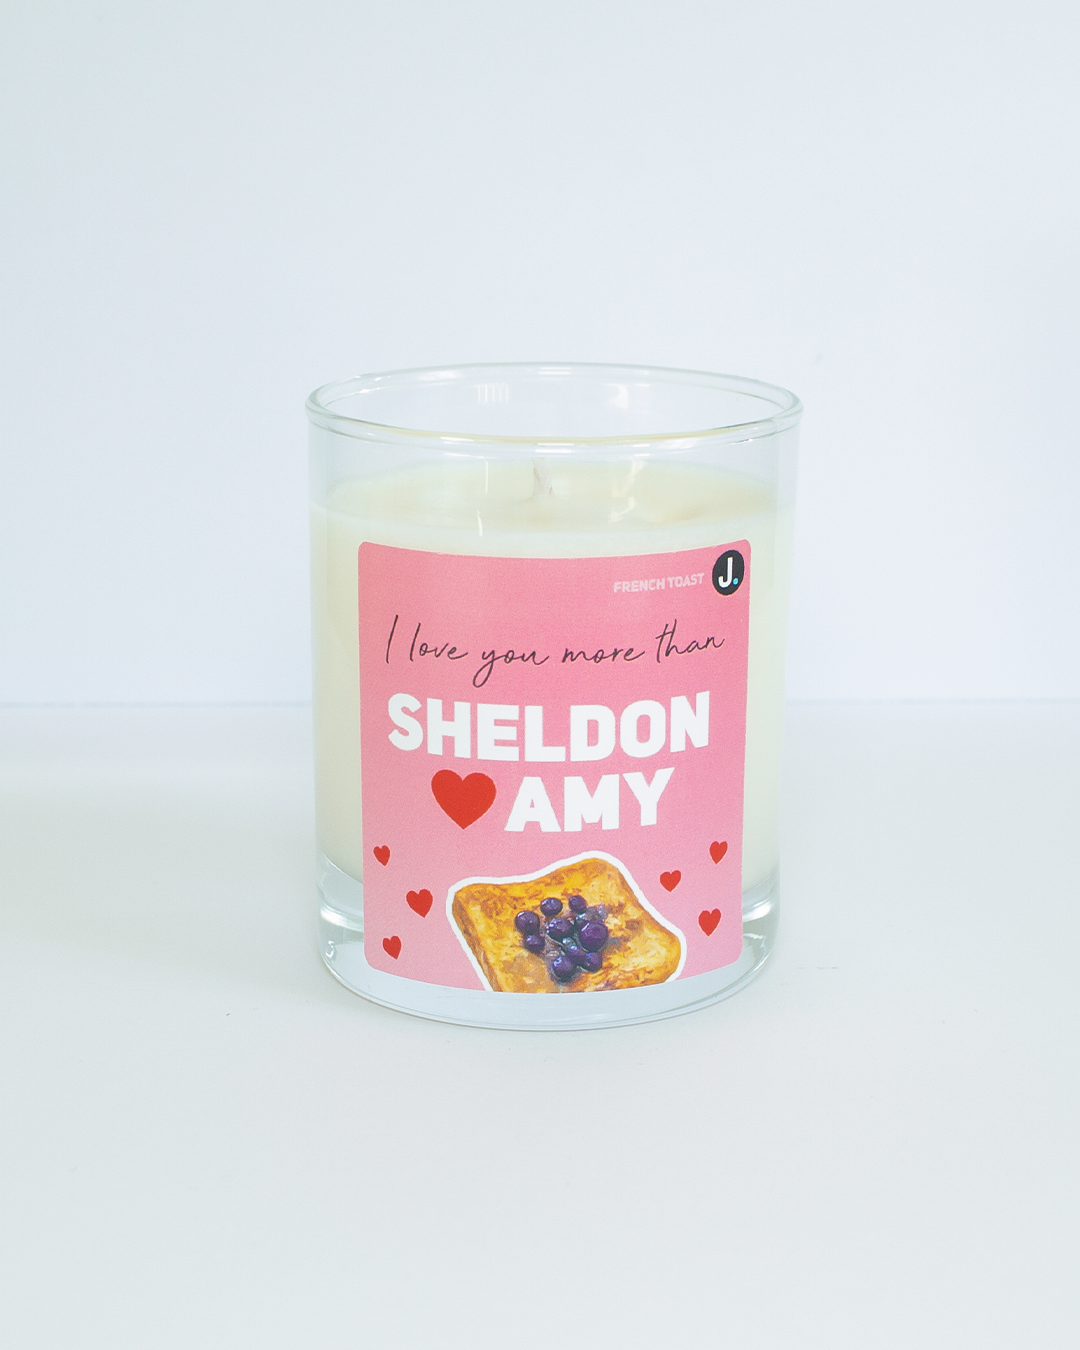 Sheldon & Amy (Cinnamon French Toast) - The Big Bang Theory Inspired Candle - French Toast Scented Candle